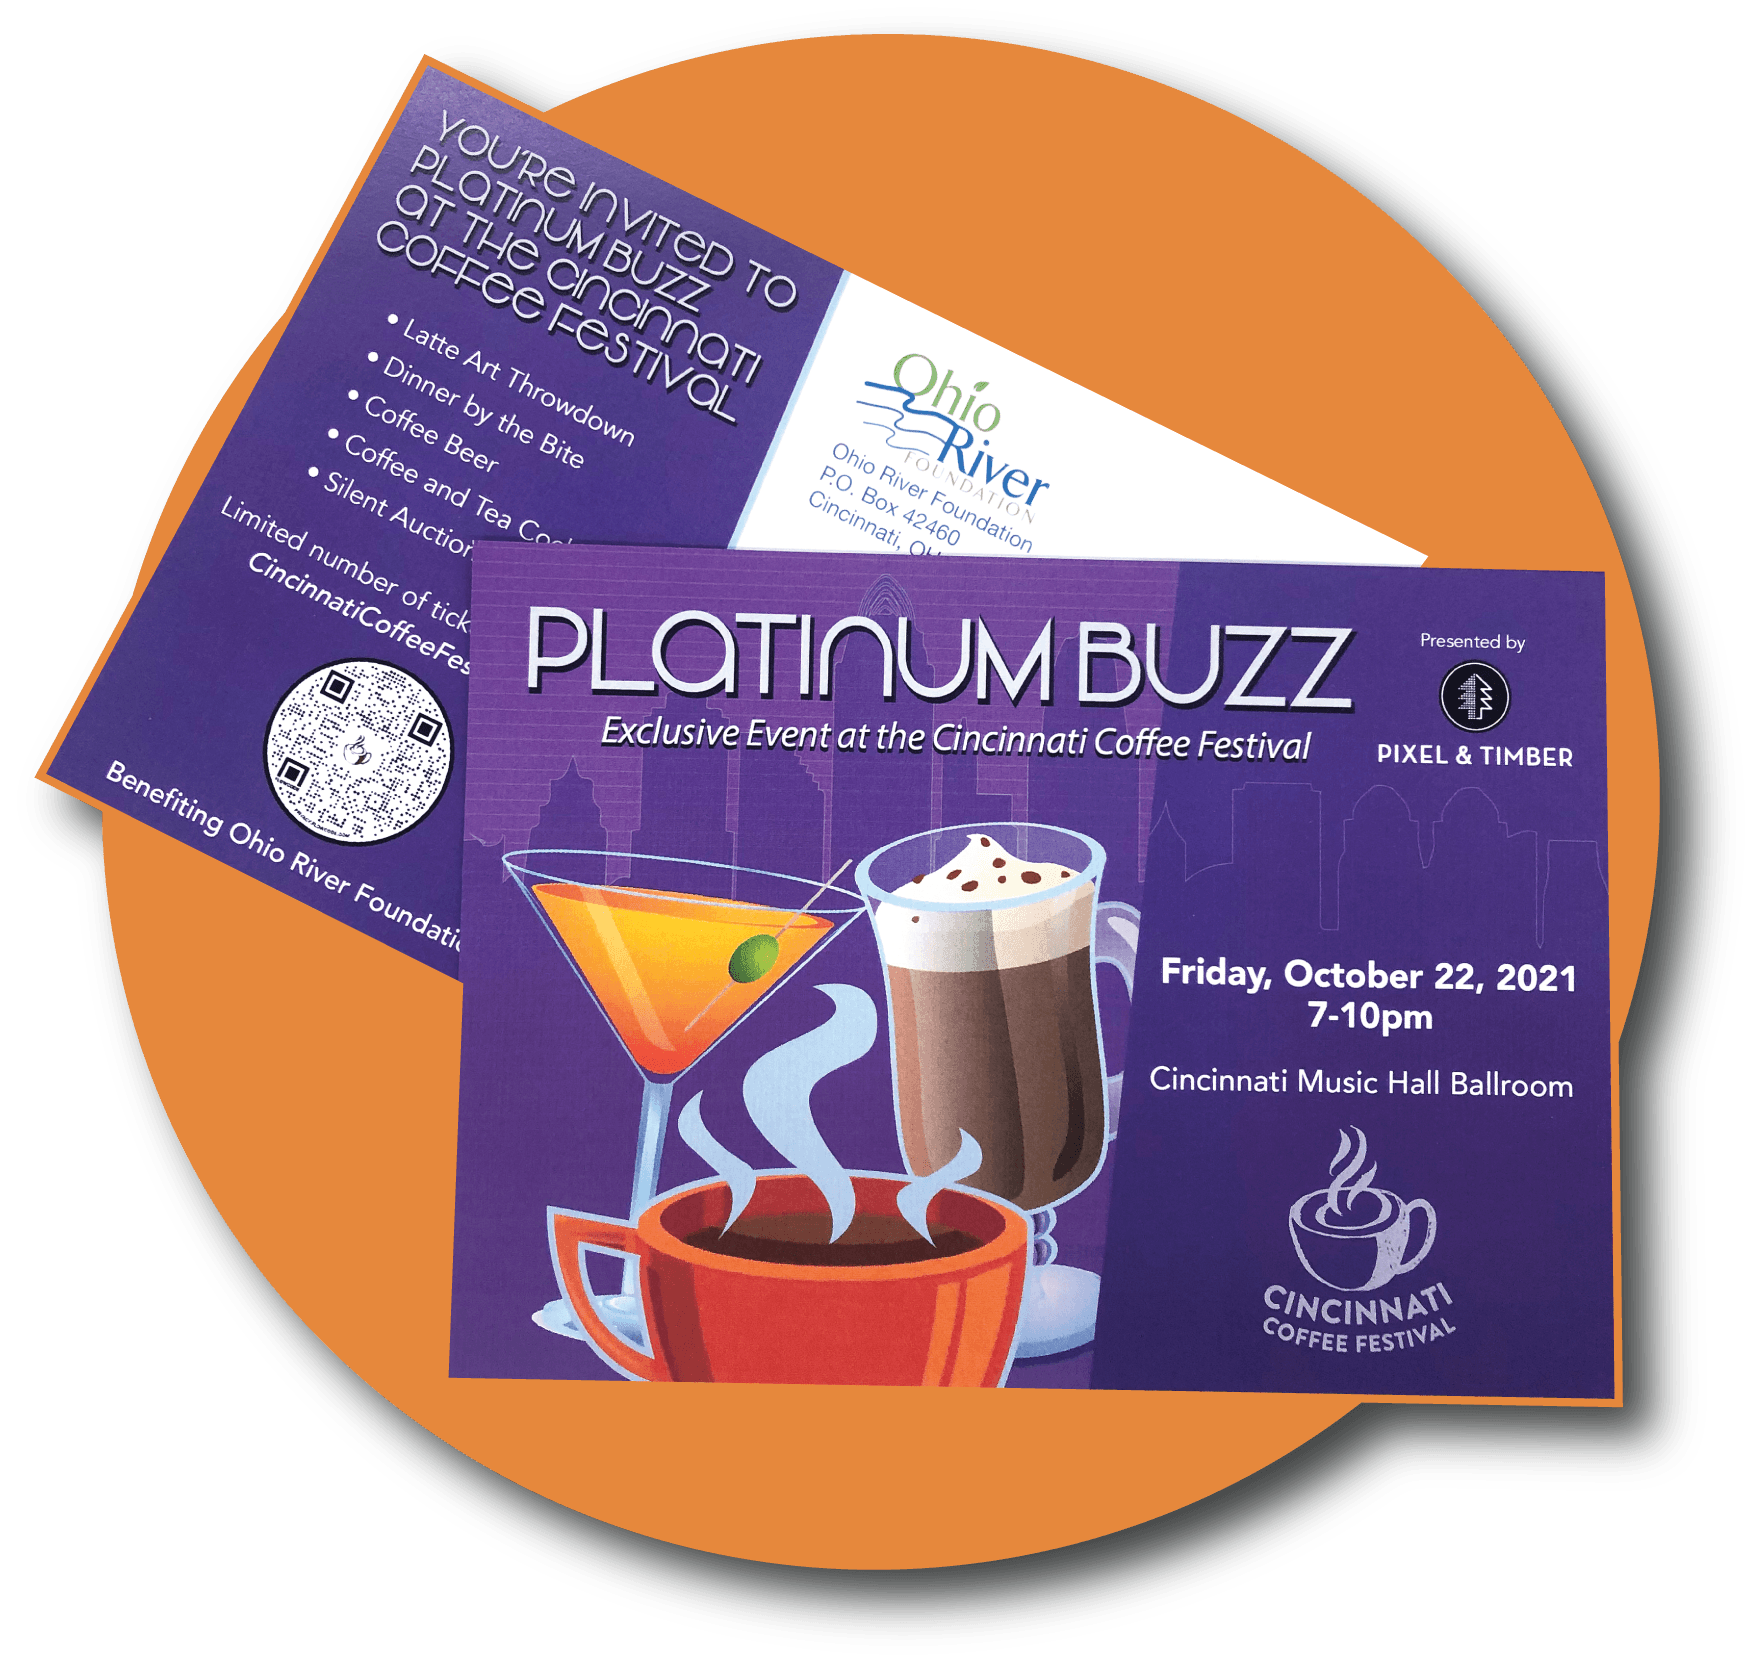 The Front of a Purple Postcard that Says “Platinum Buzz” with Graphics of Drinks and the Back of the Same Postcard Under